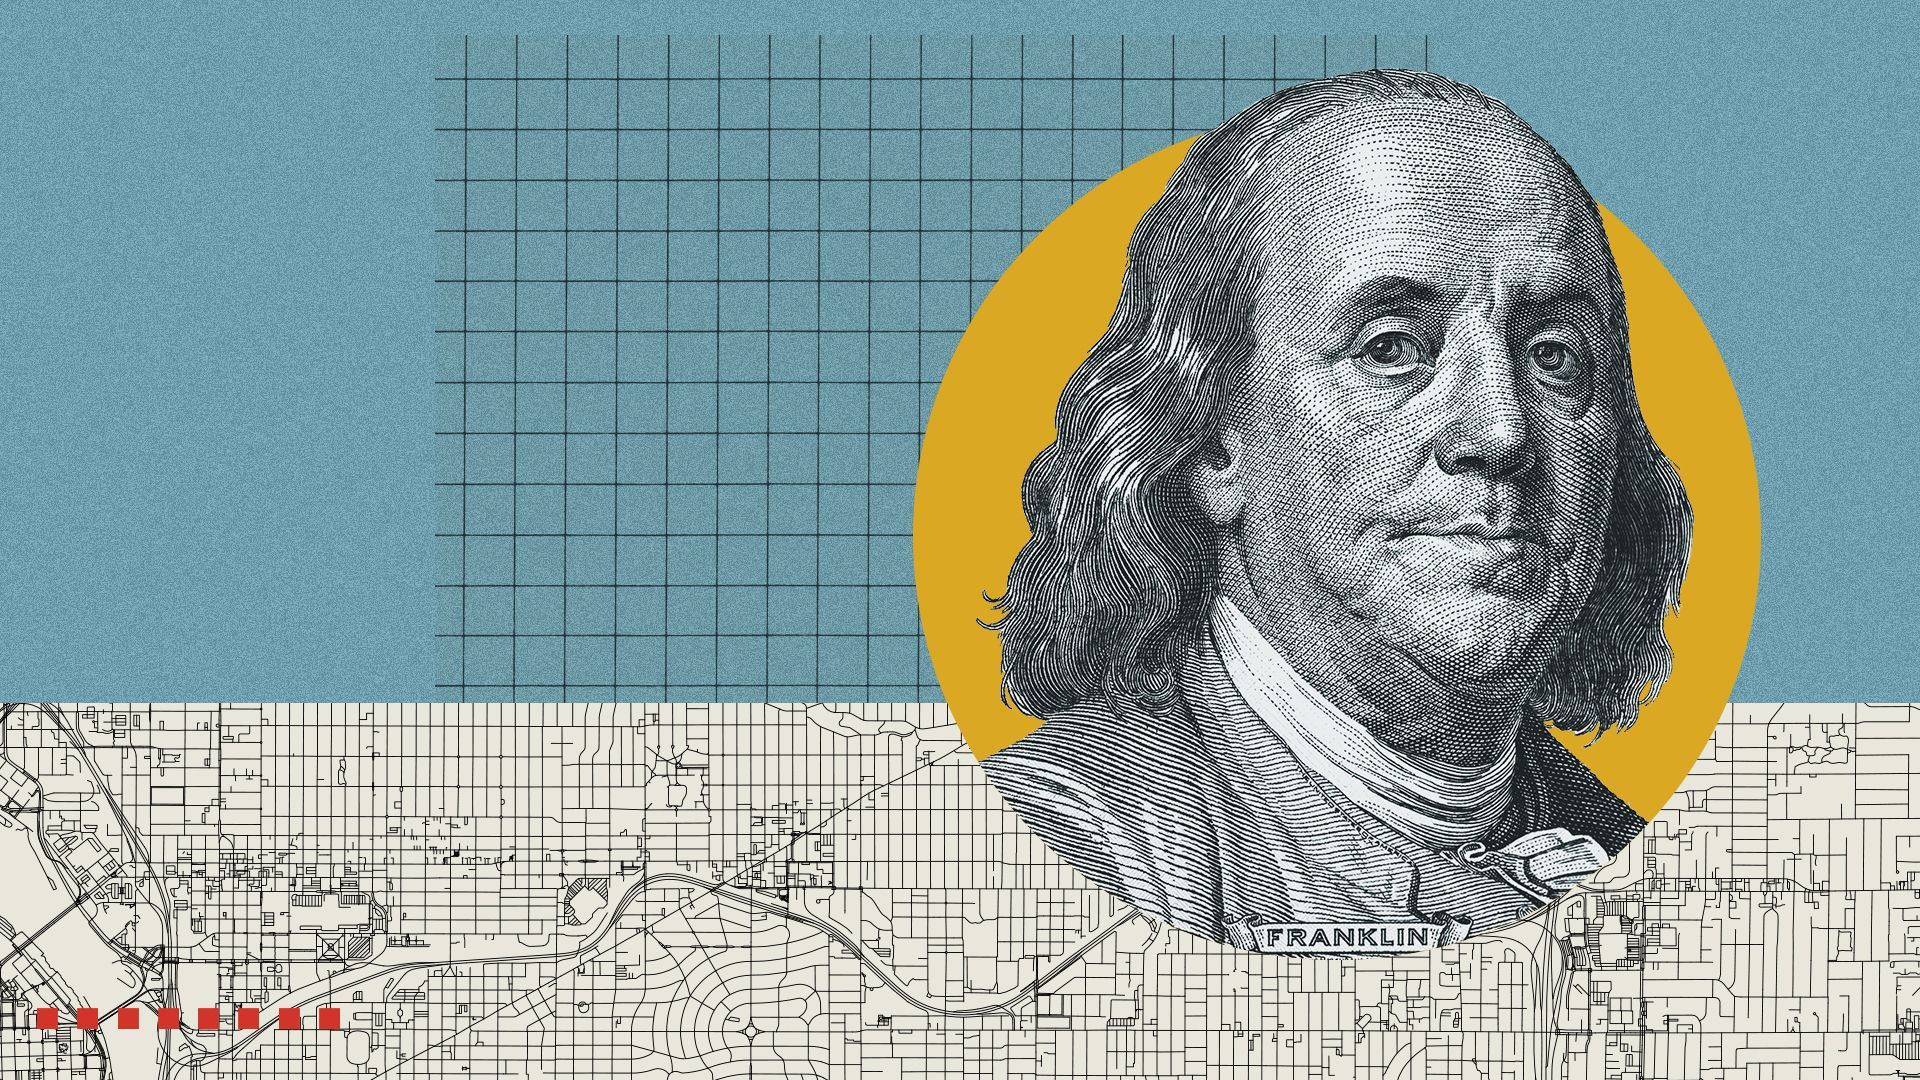 Photo illustration of Benjamin Franklin inside a circle with a grid and the map of Portland in the background.